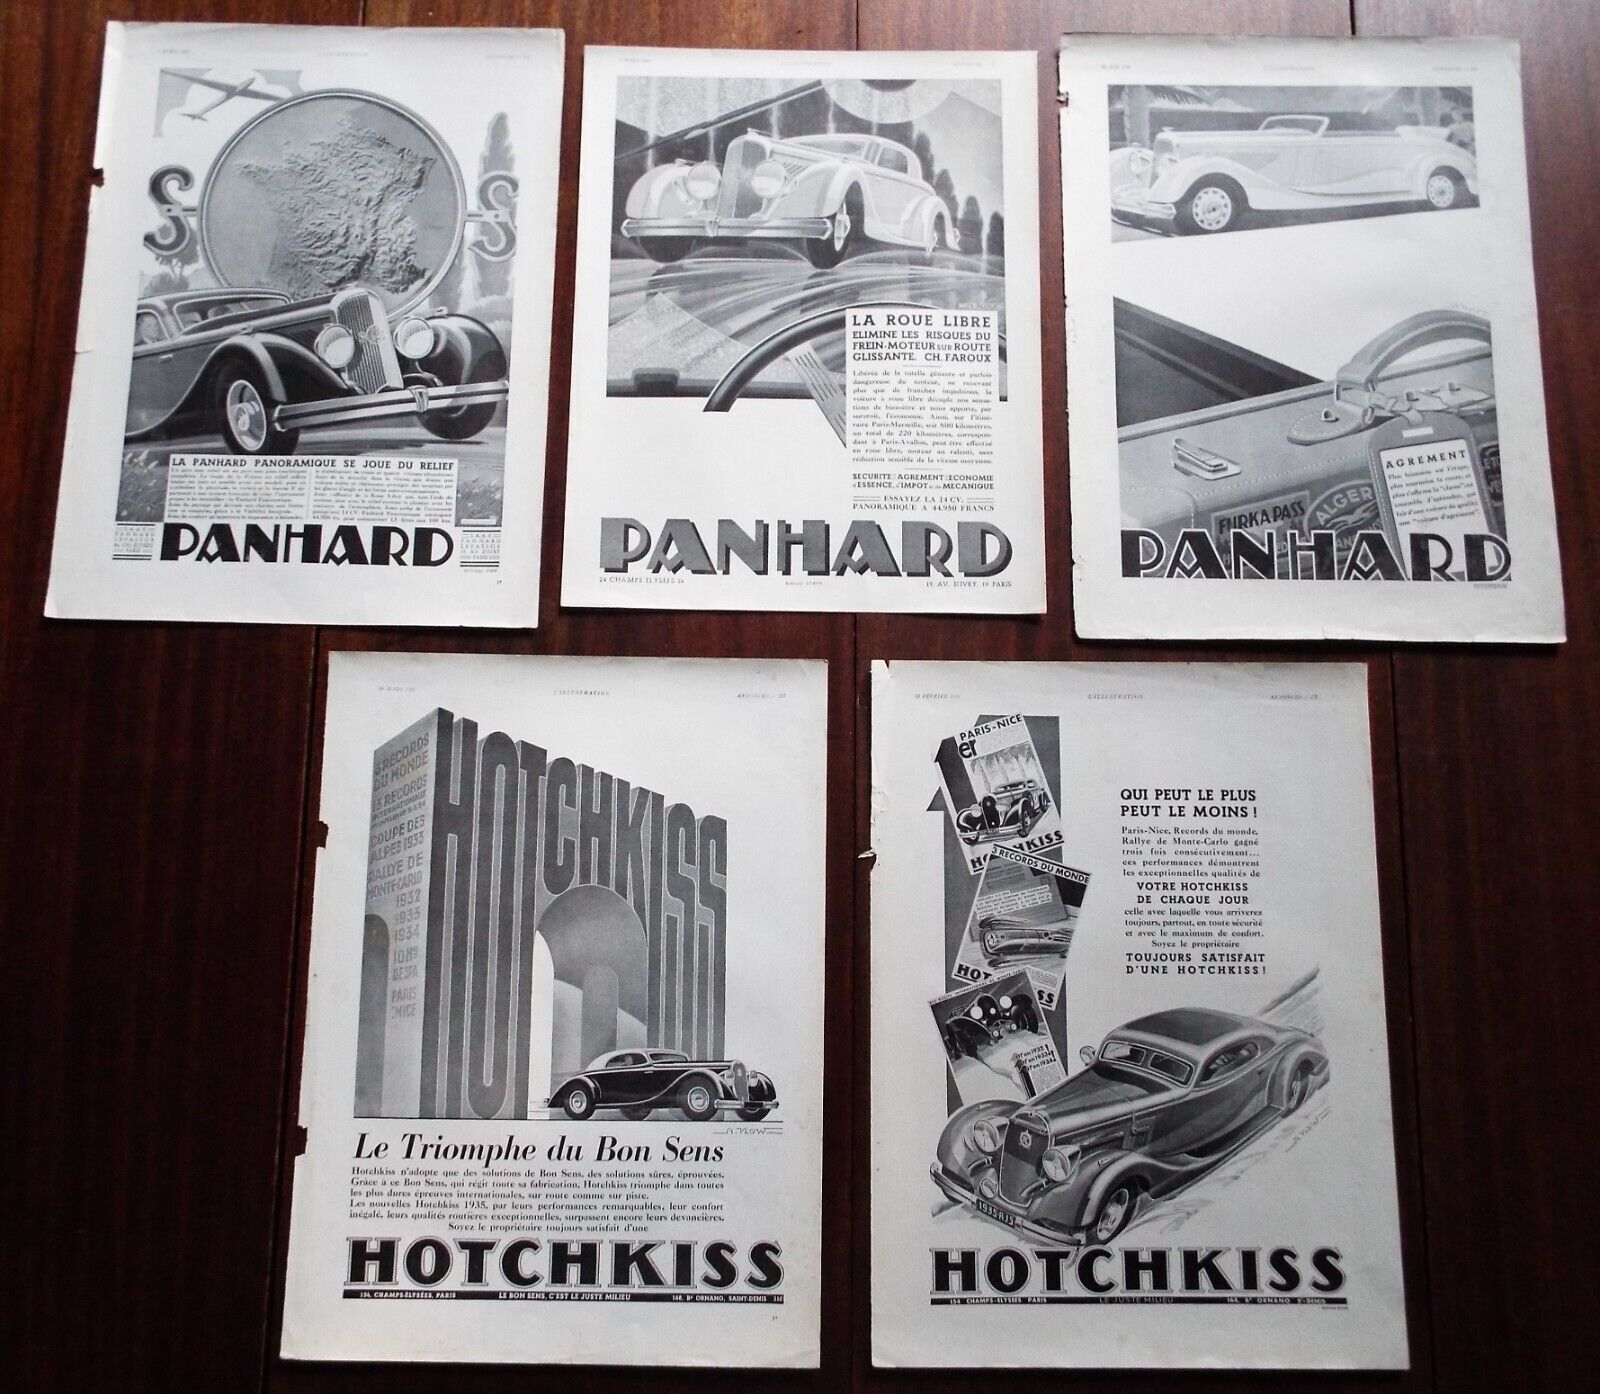 Vintage Lot of 5 1935 French Car Ads, Panhard and Hotchkiss Ads by A. Kow